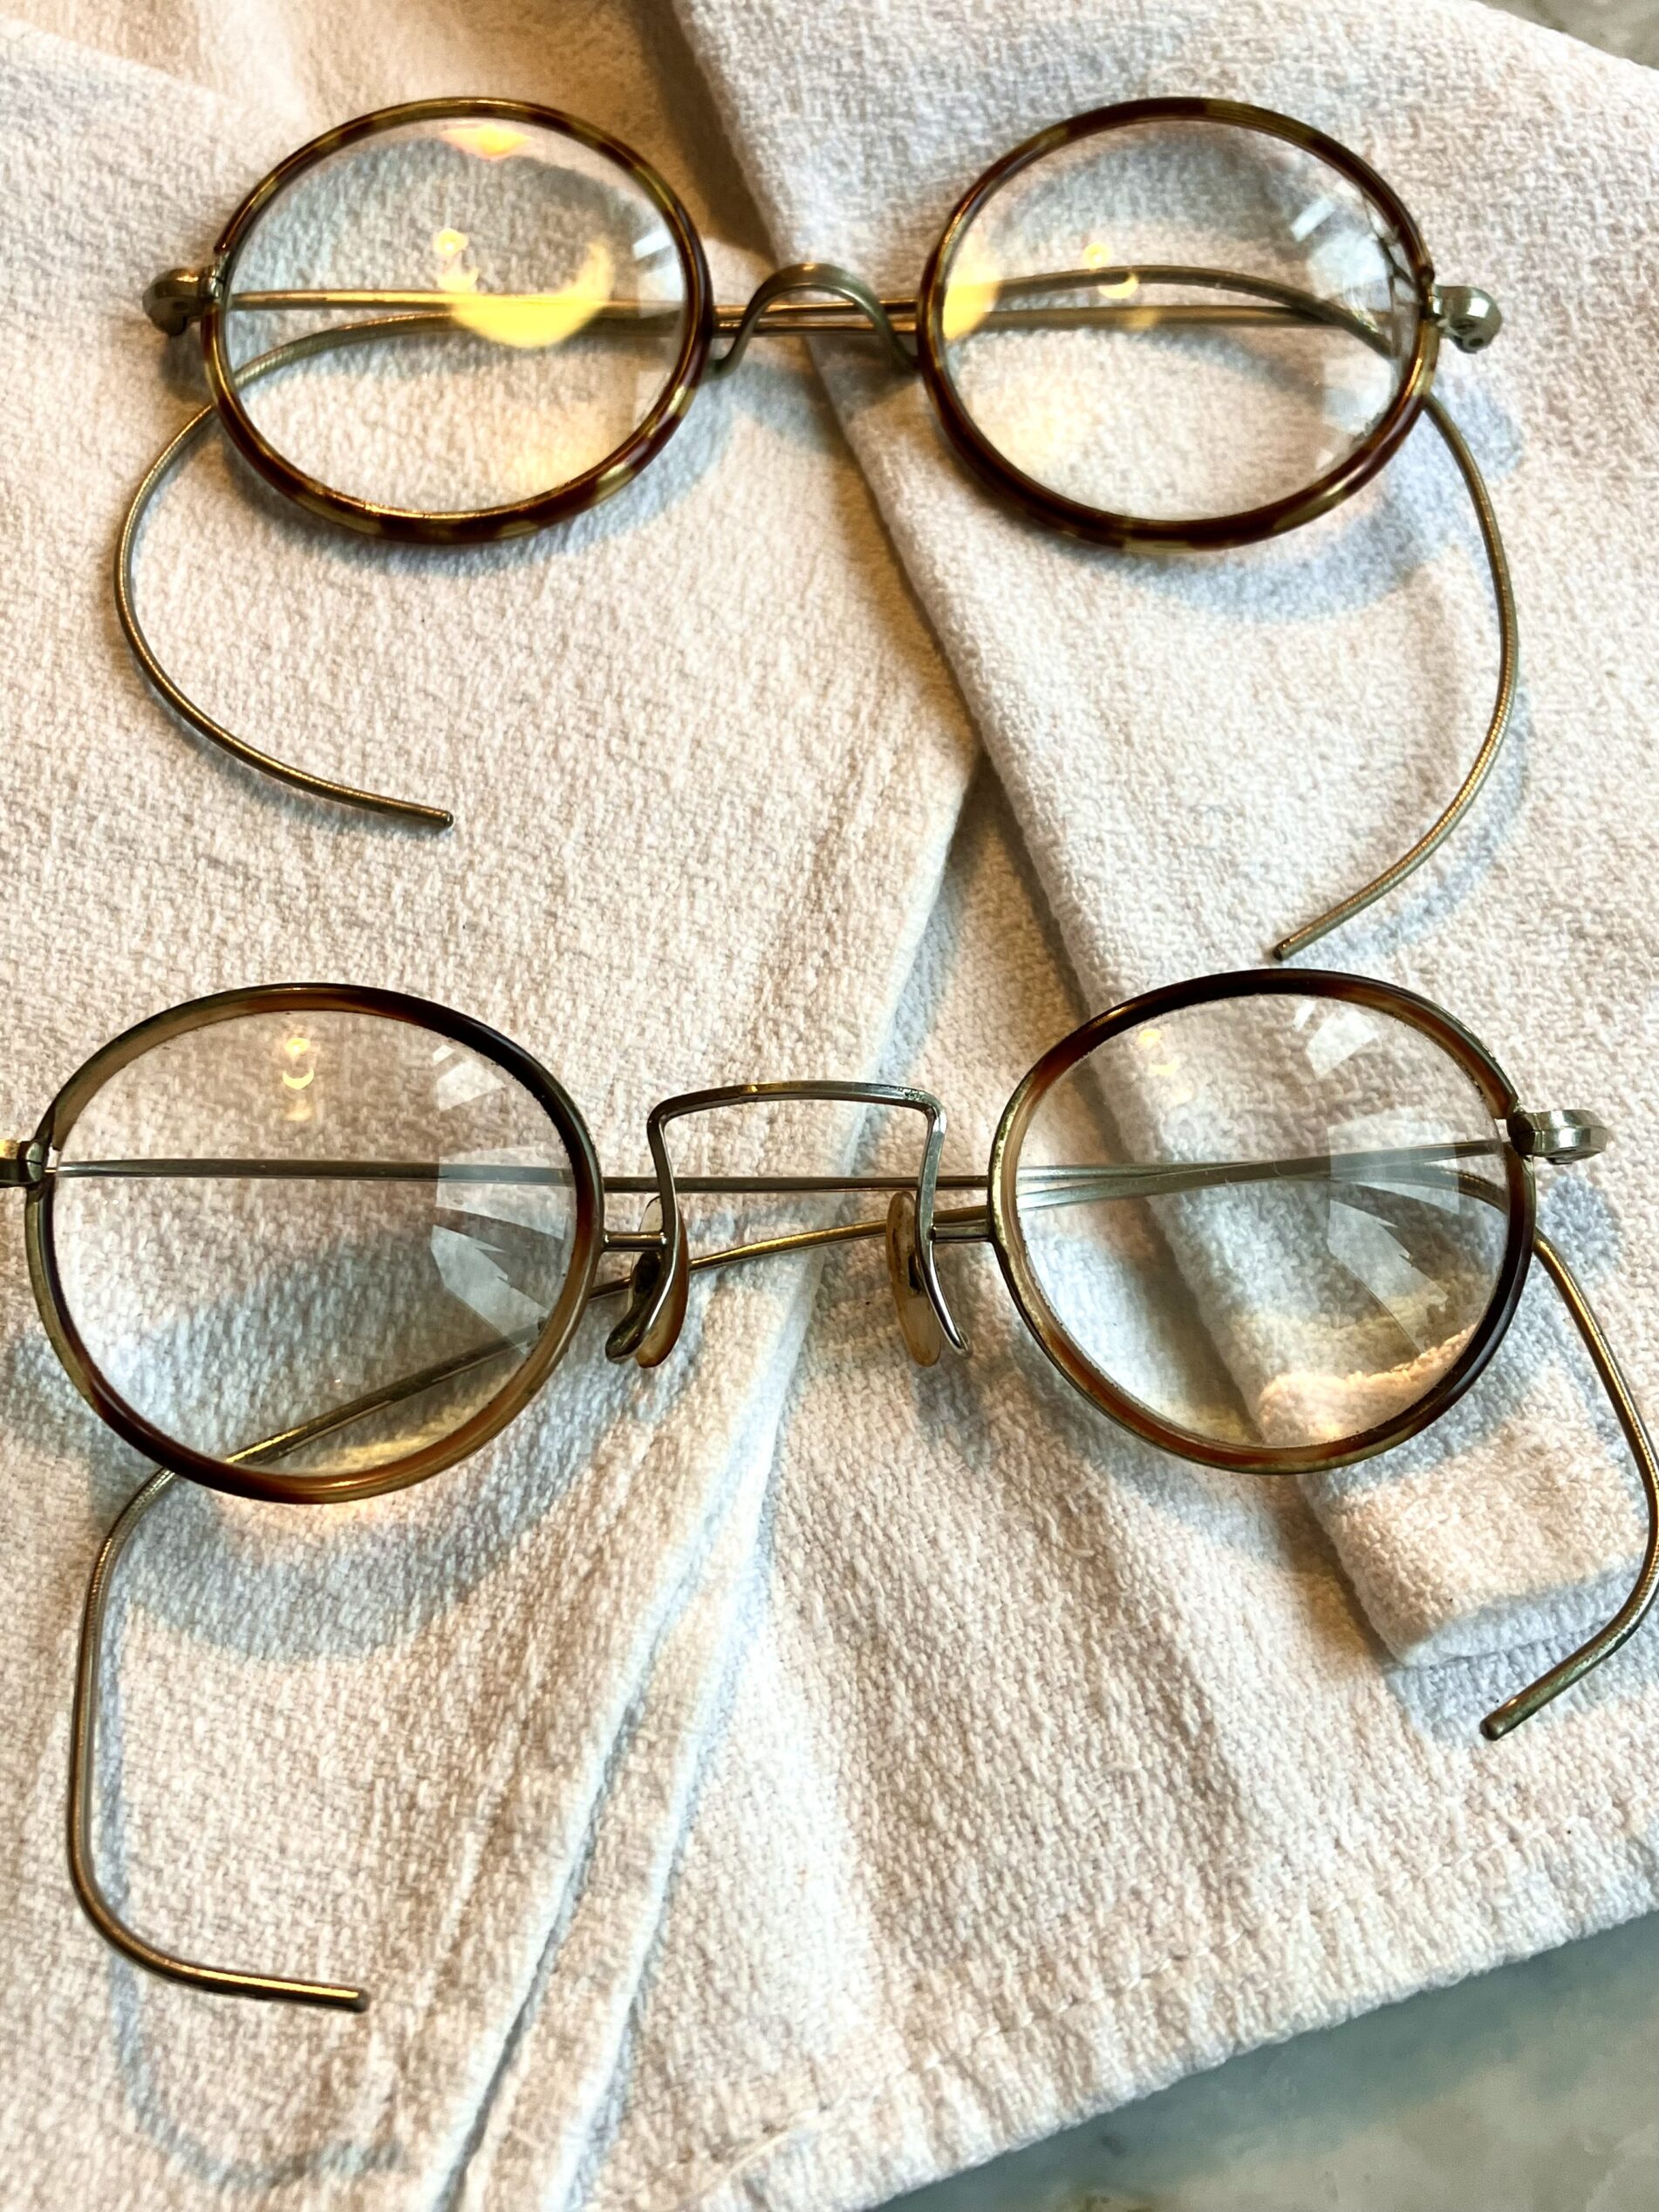 Very Old Spectacles